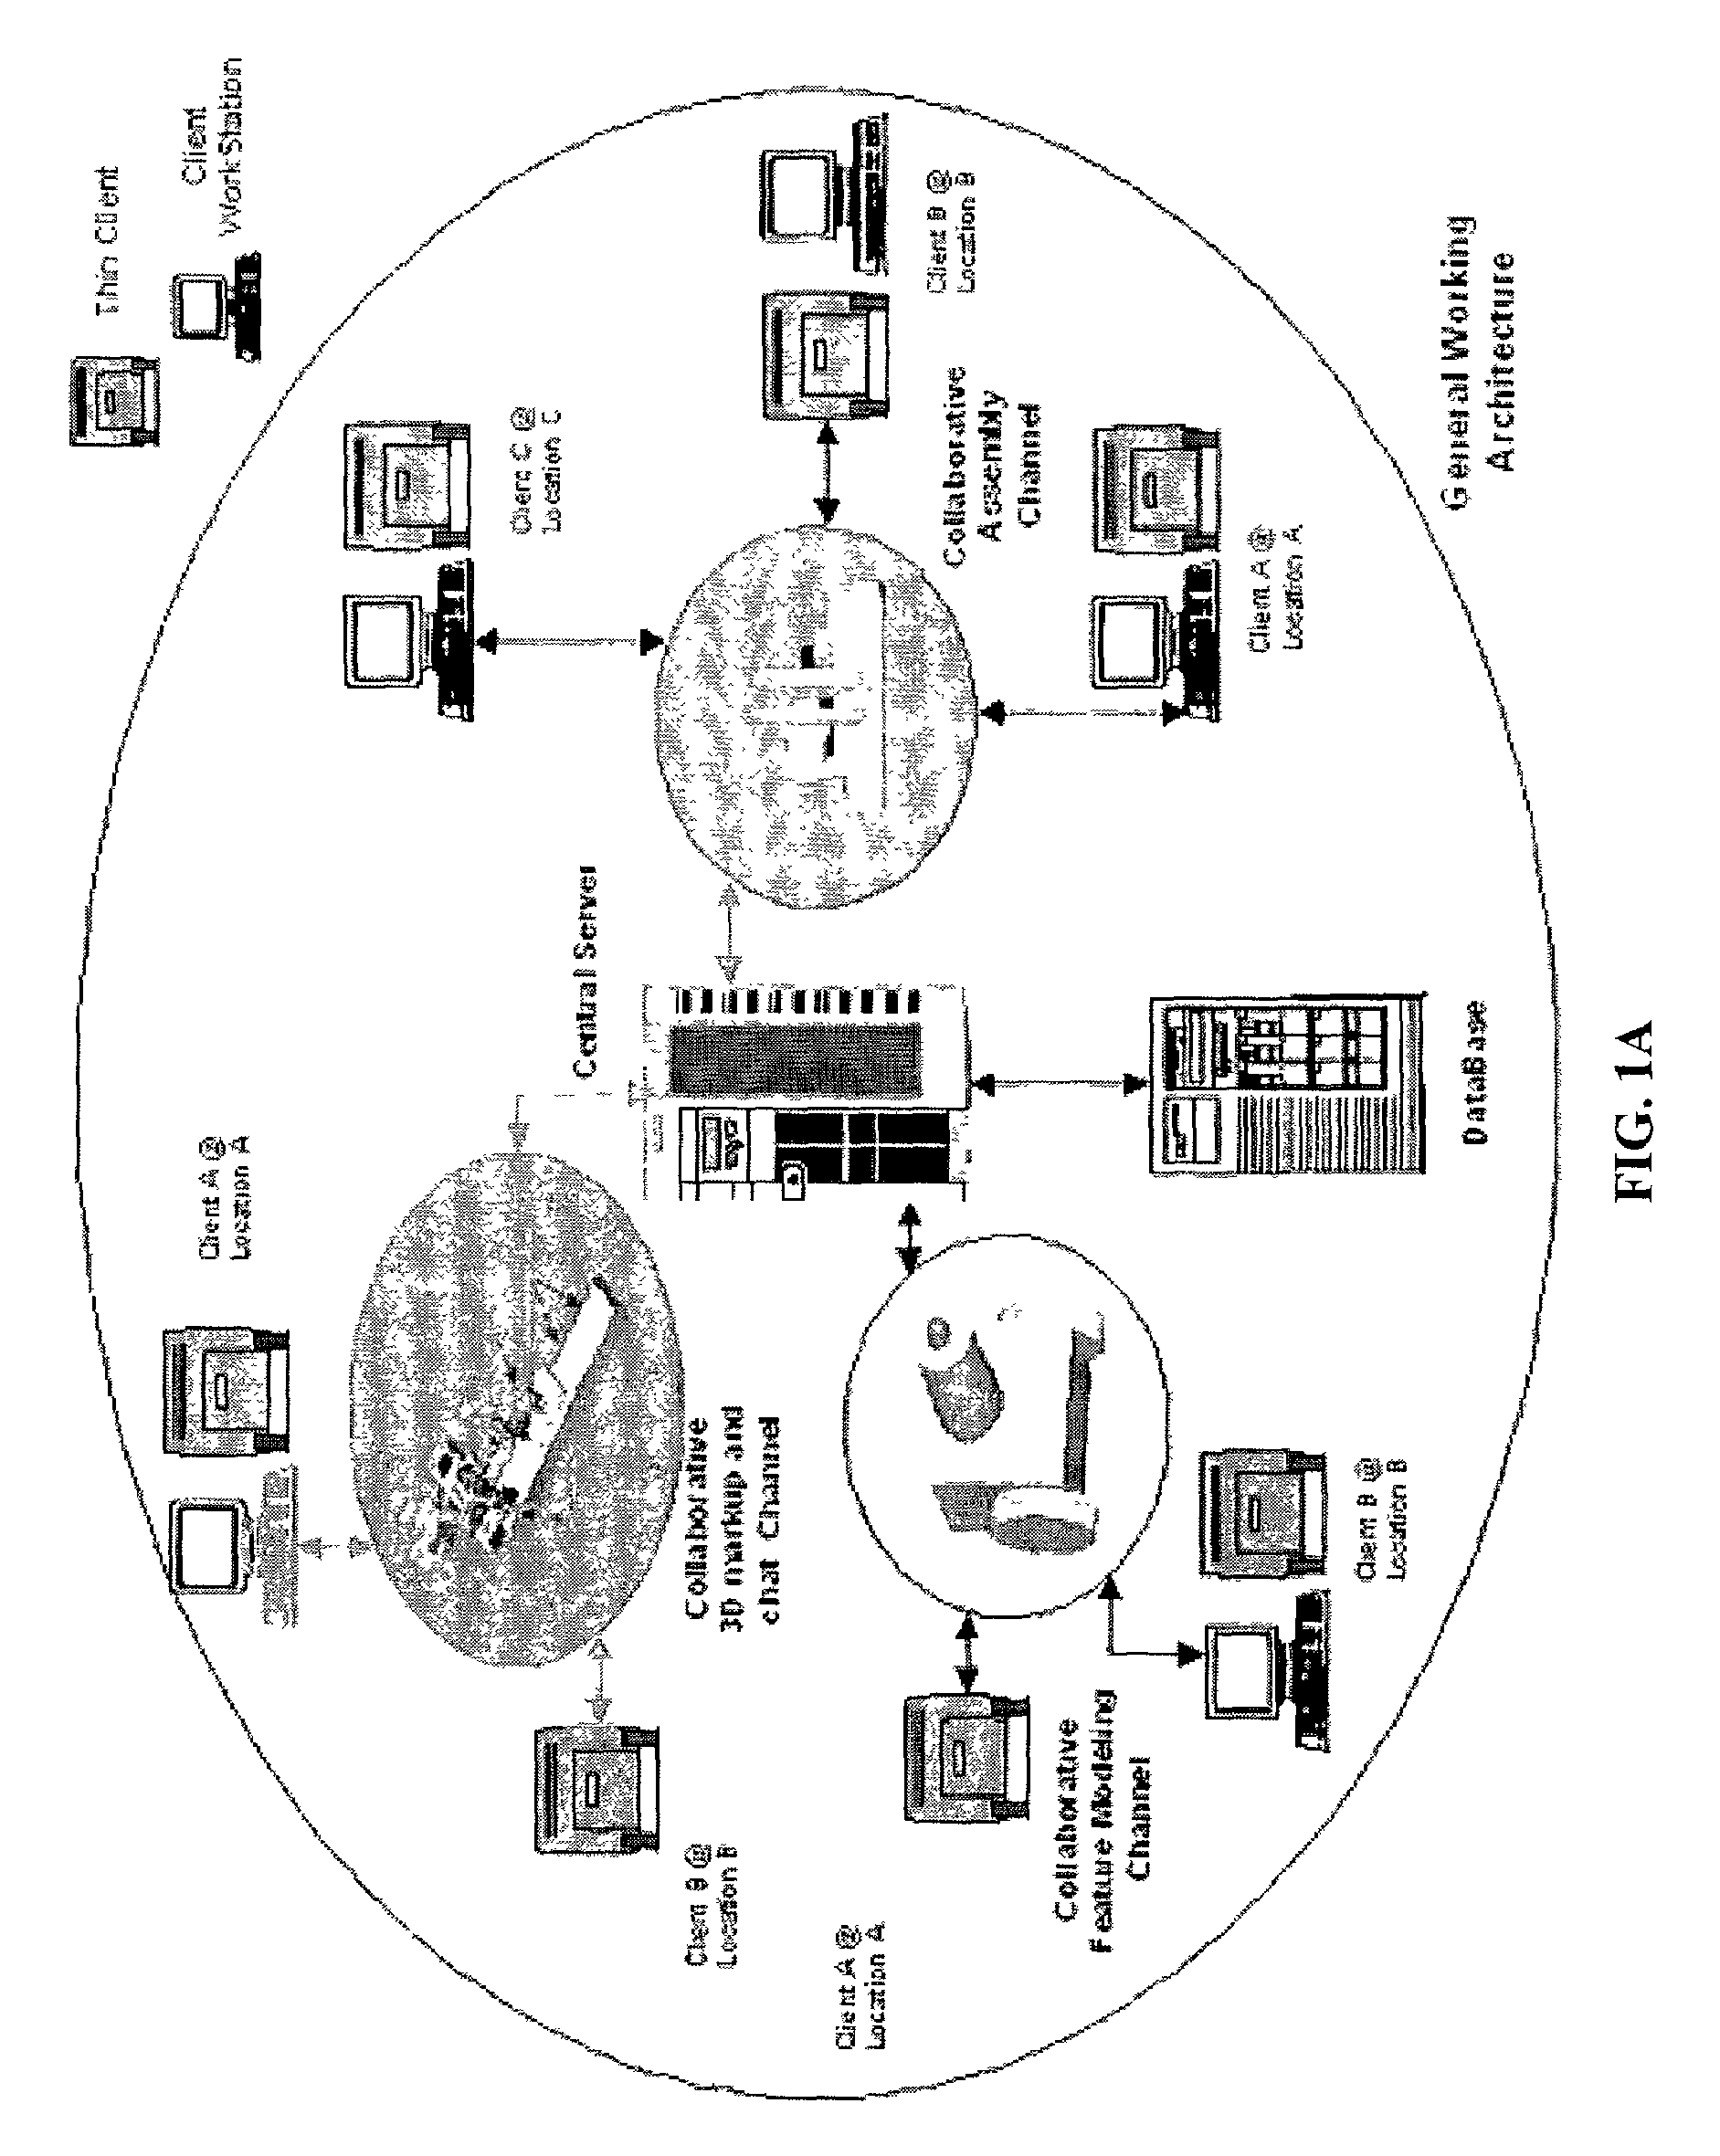 Systems and methods for collaborative shape and design